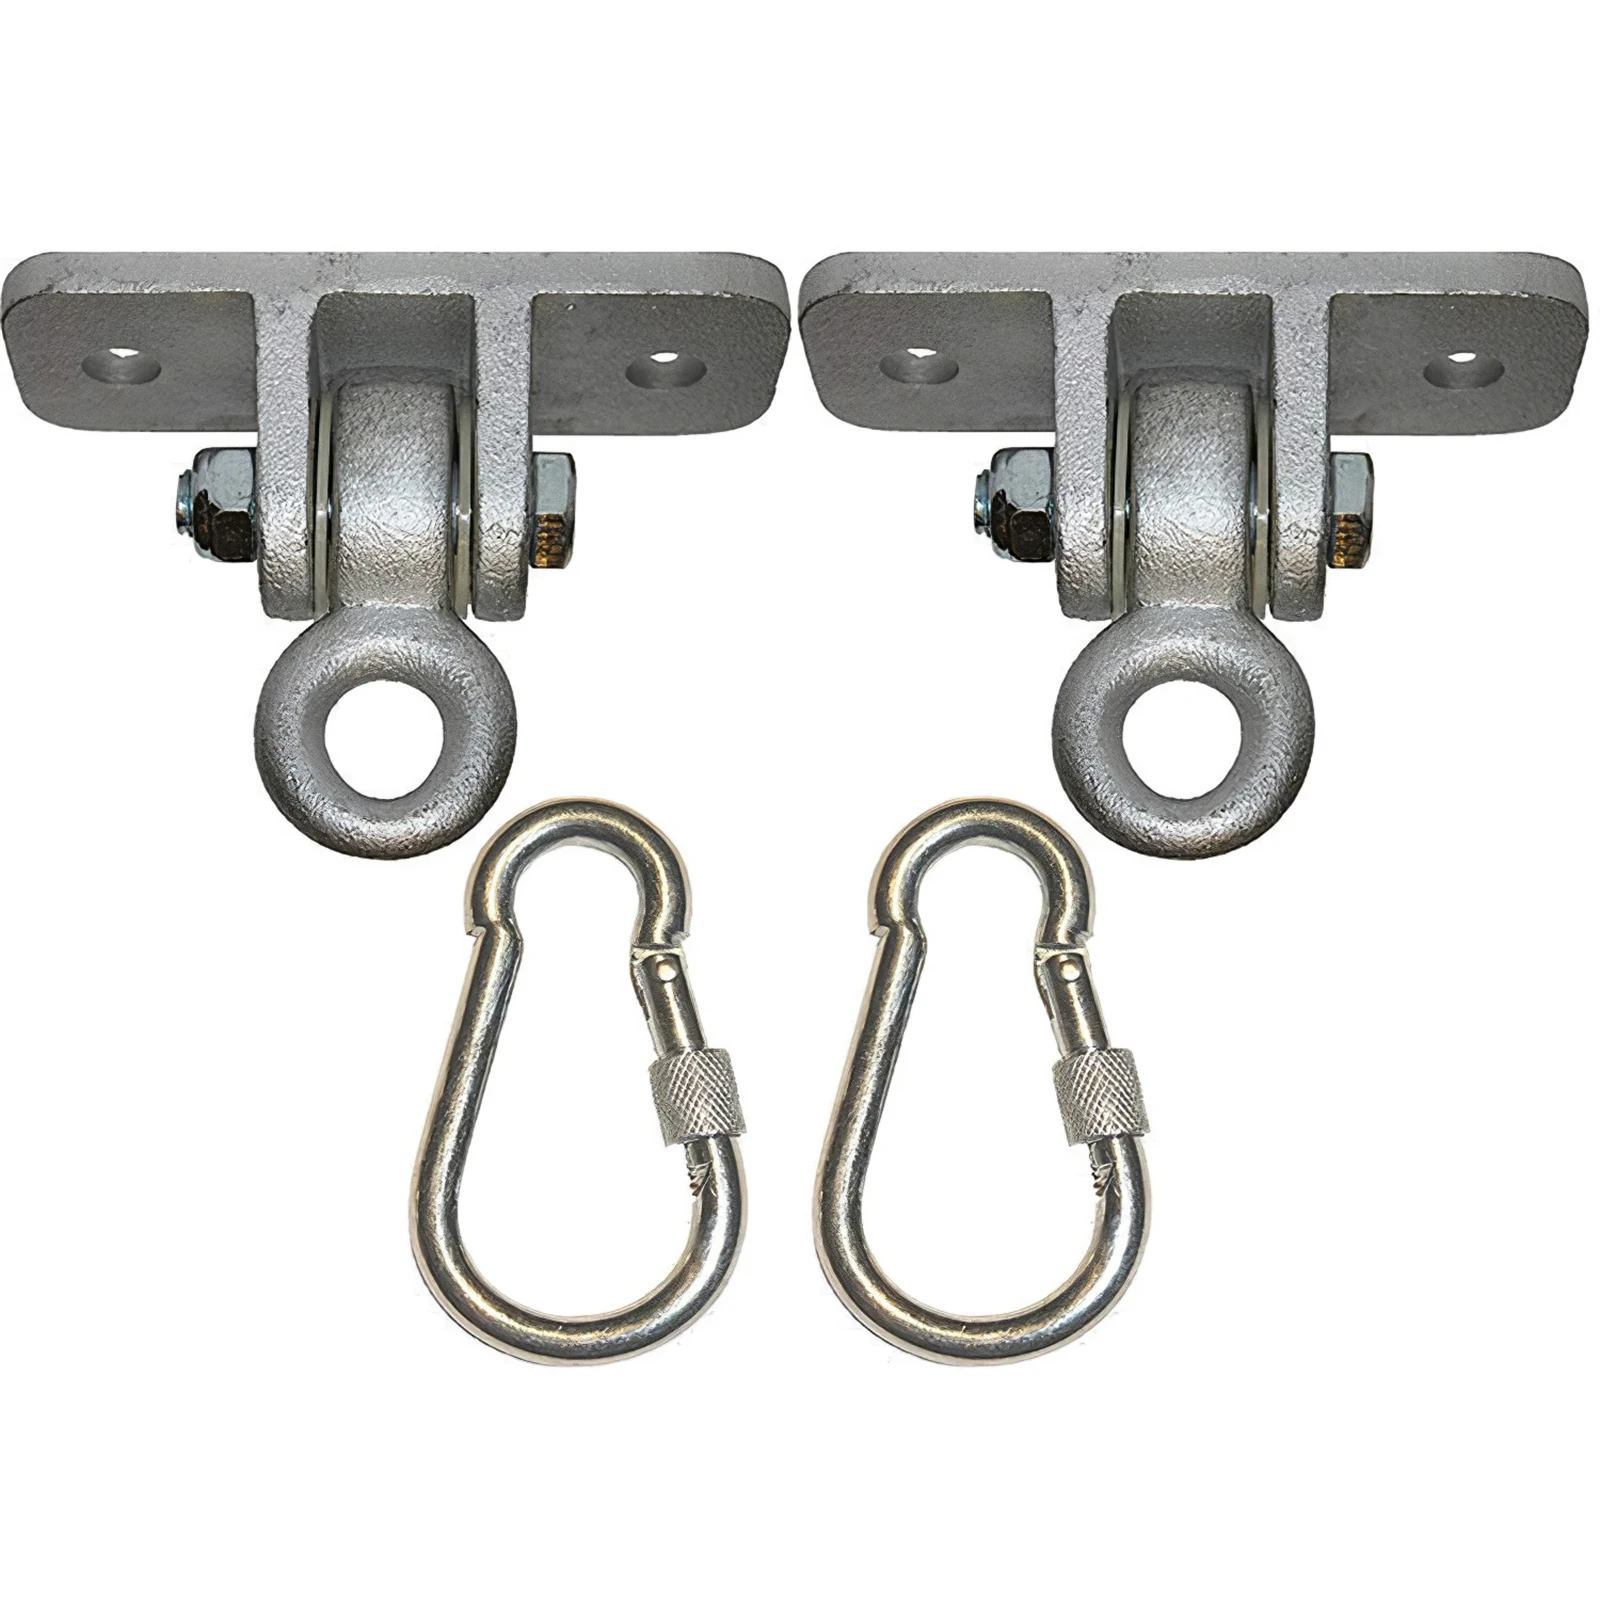 

Mounting Bracket Set Fixing Bases Locking Snap Hooks Cast Steel 2200lb Capacity Heavy Duty Multifunctional For Home Garden Patio